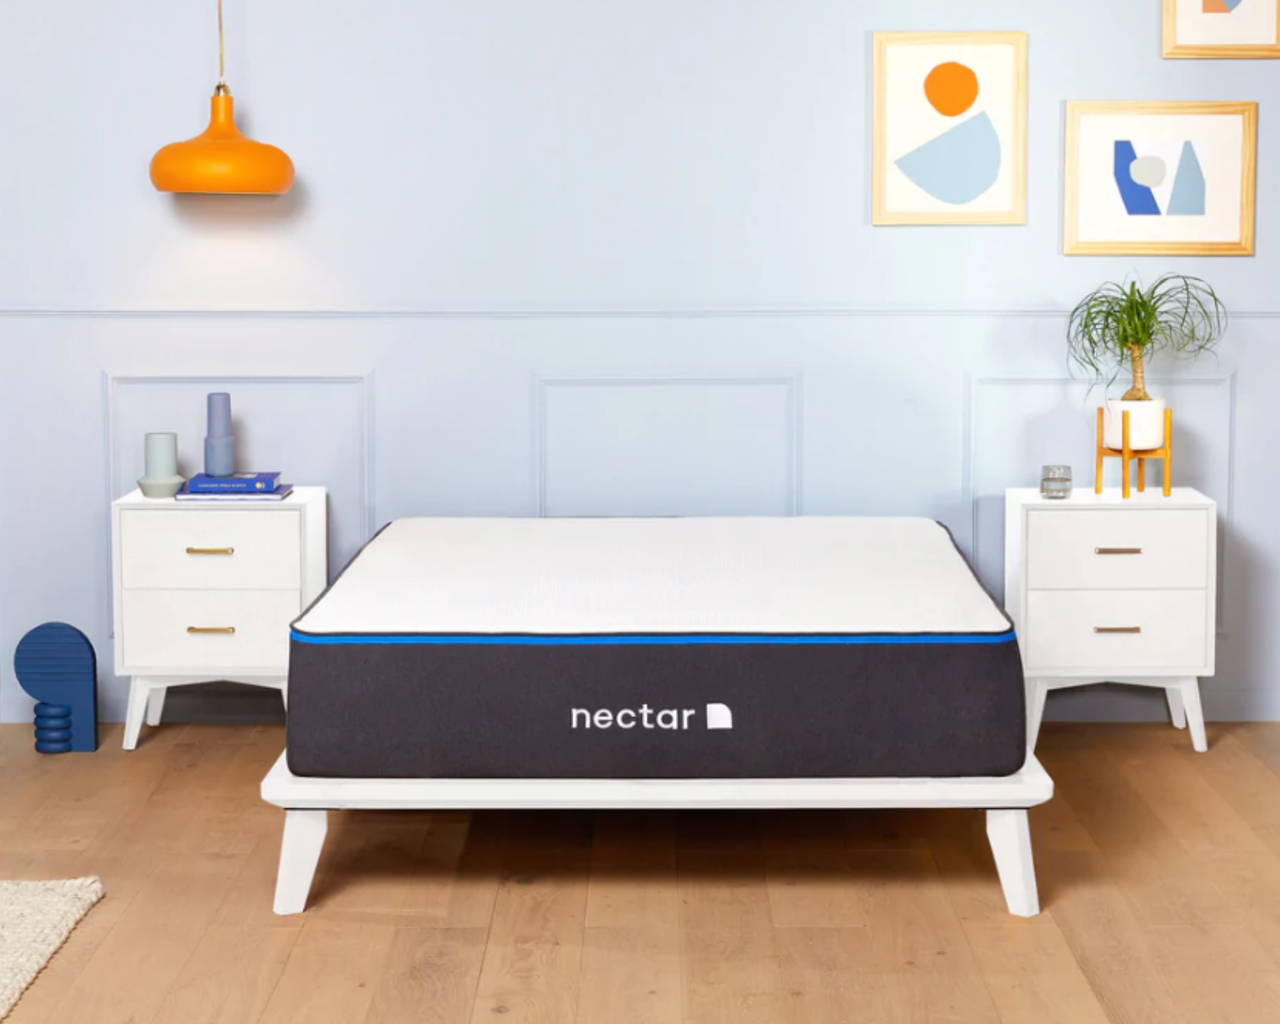 Best mattress 2023 12 reviewed beds you'll want to jump right into